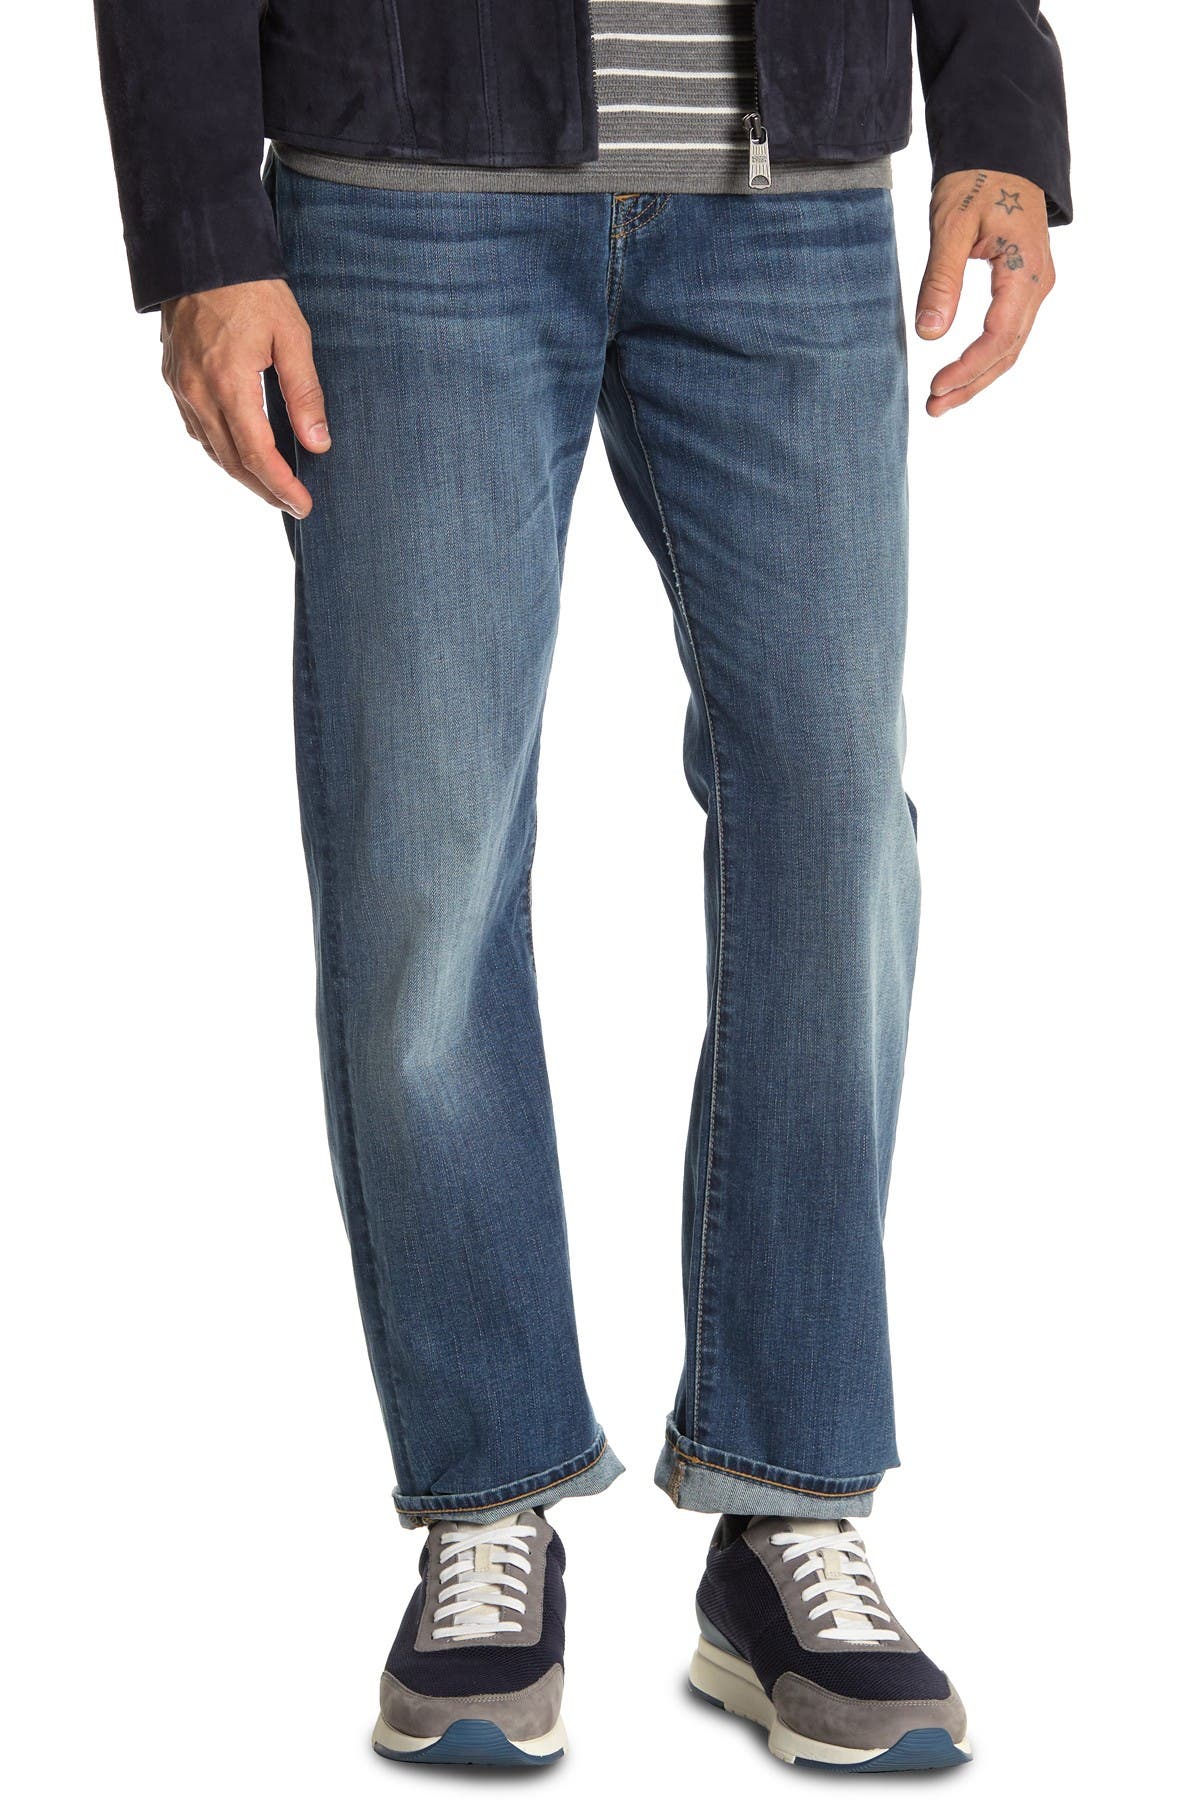 7 for all mankind austyn jeans